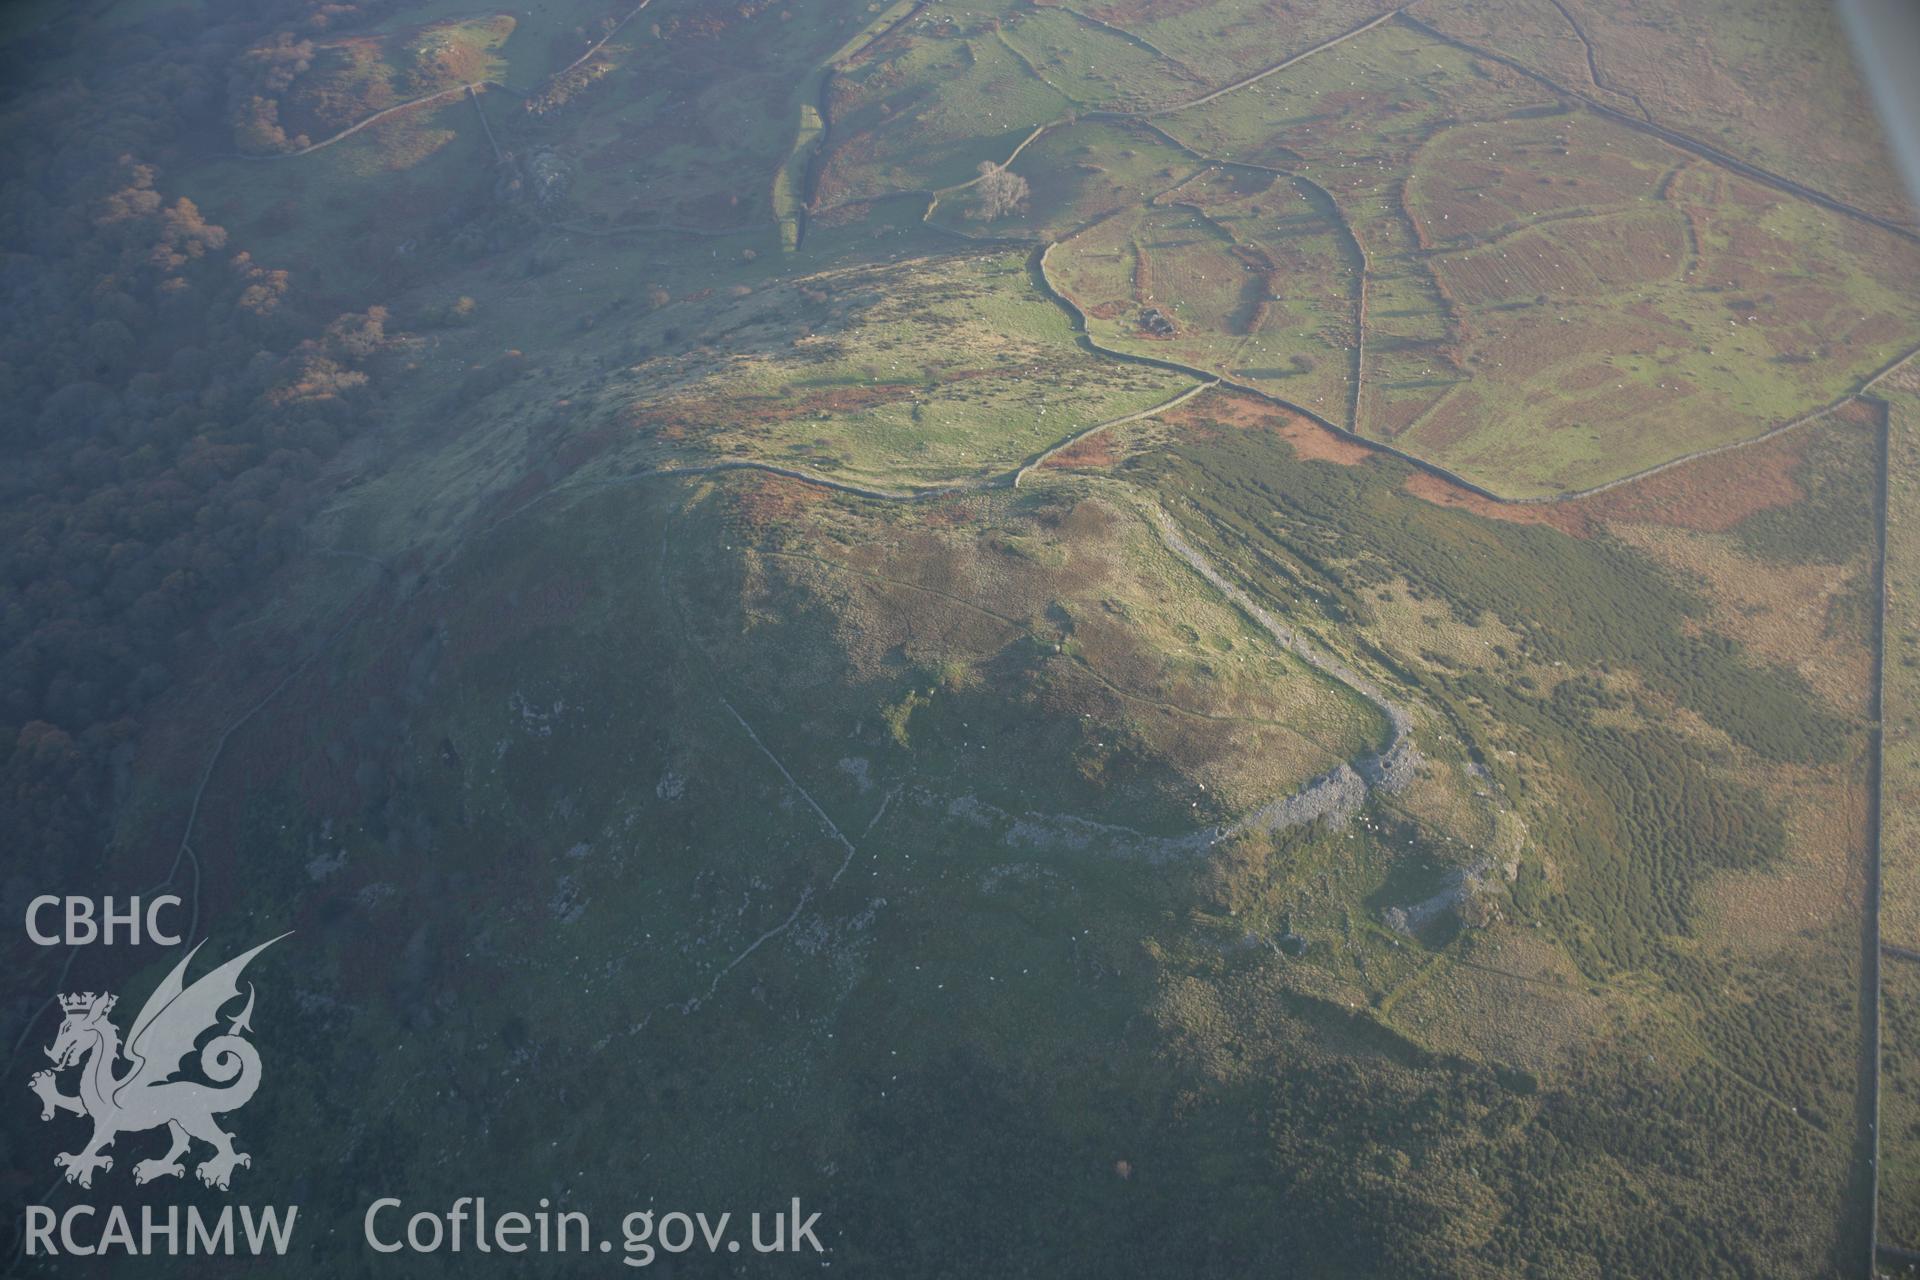 RCAHMW colour oblique aerial photograph of Pen-y-Gaer Hillfort, viewed from the north-west. Taken on 21 November 2005 by Toby Driver